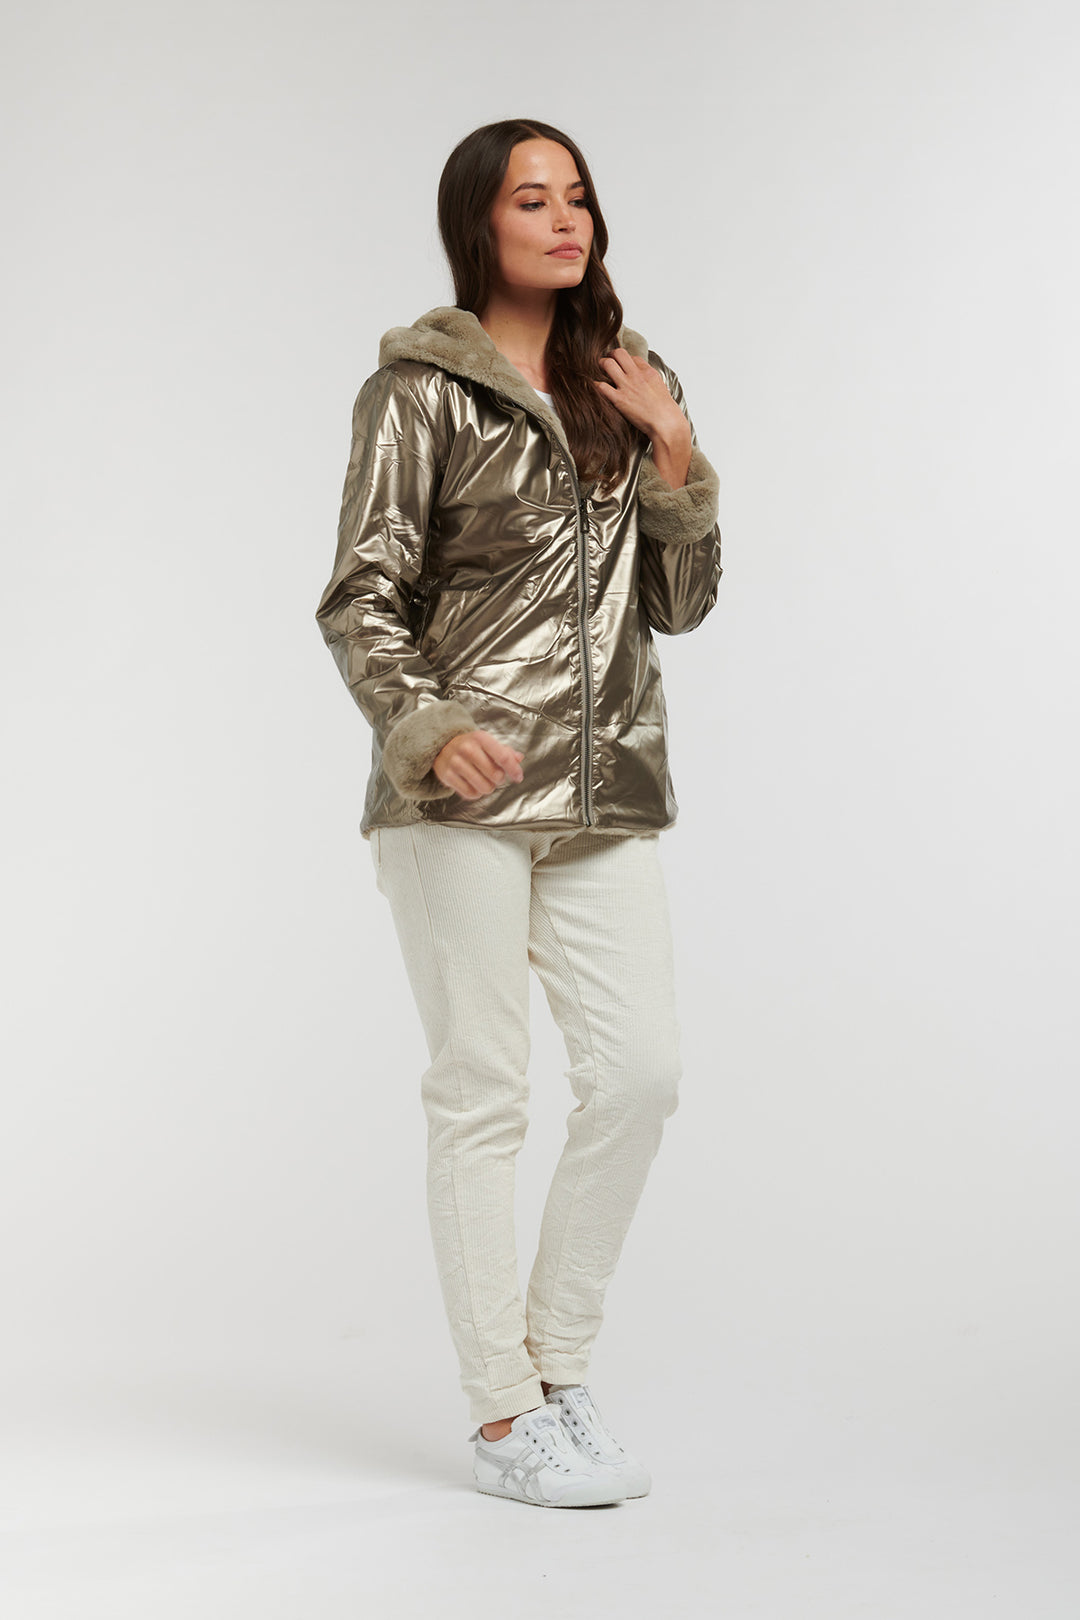 Arctic Jacket - White Gold - IS27